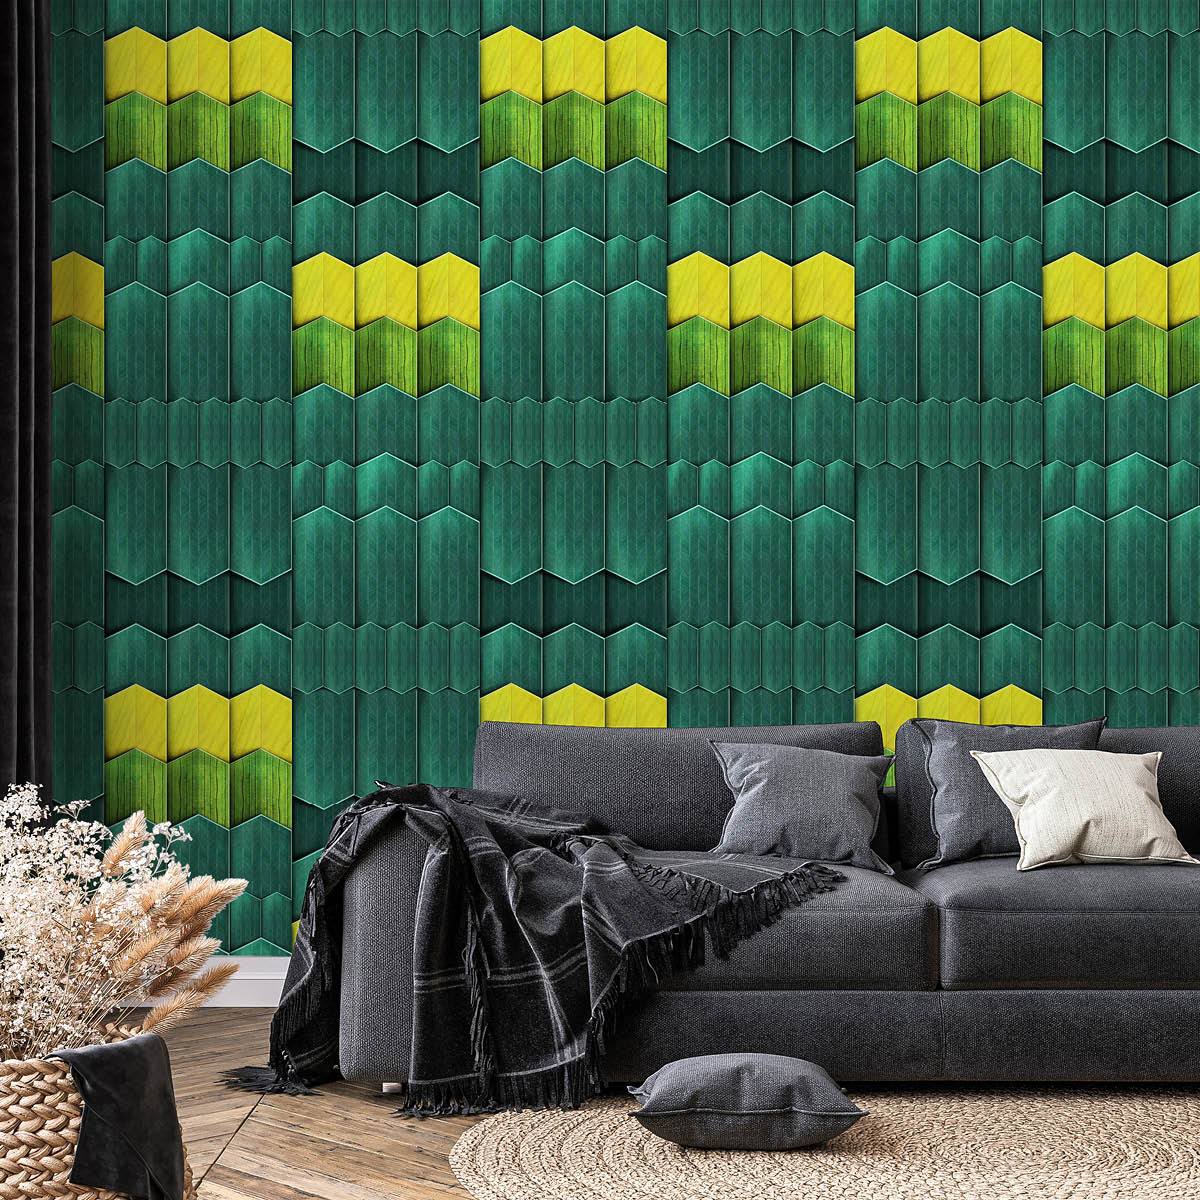 SUZ-06 Yellow Edge wallpaper by Suzan Hijink for NLXL